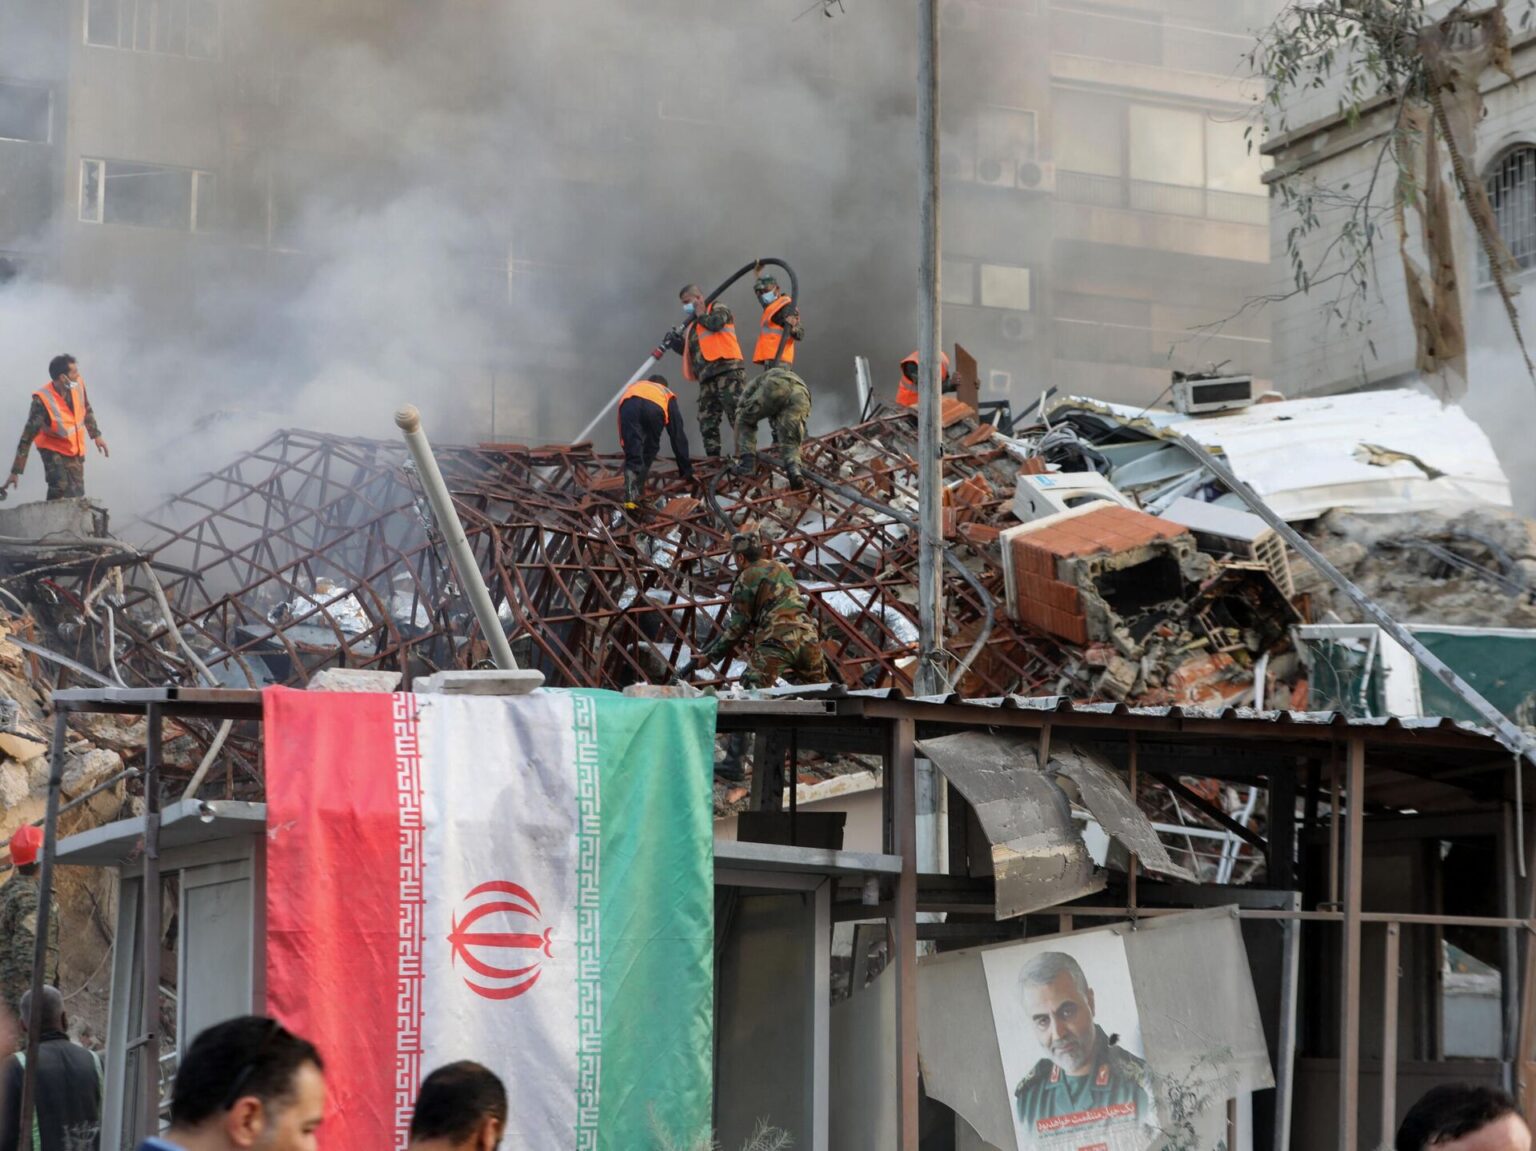 Strike on Iranian Consulate Sign of Status Quo as US, Allies Let Israel ‘Cross All Red Lines’